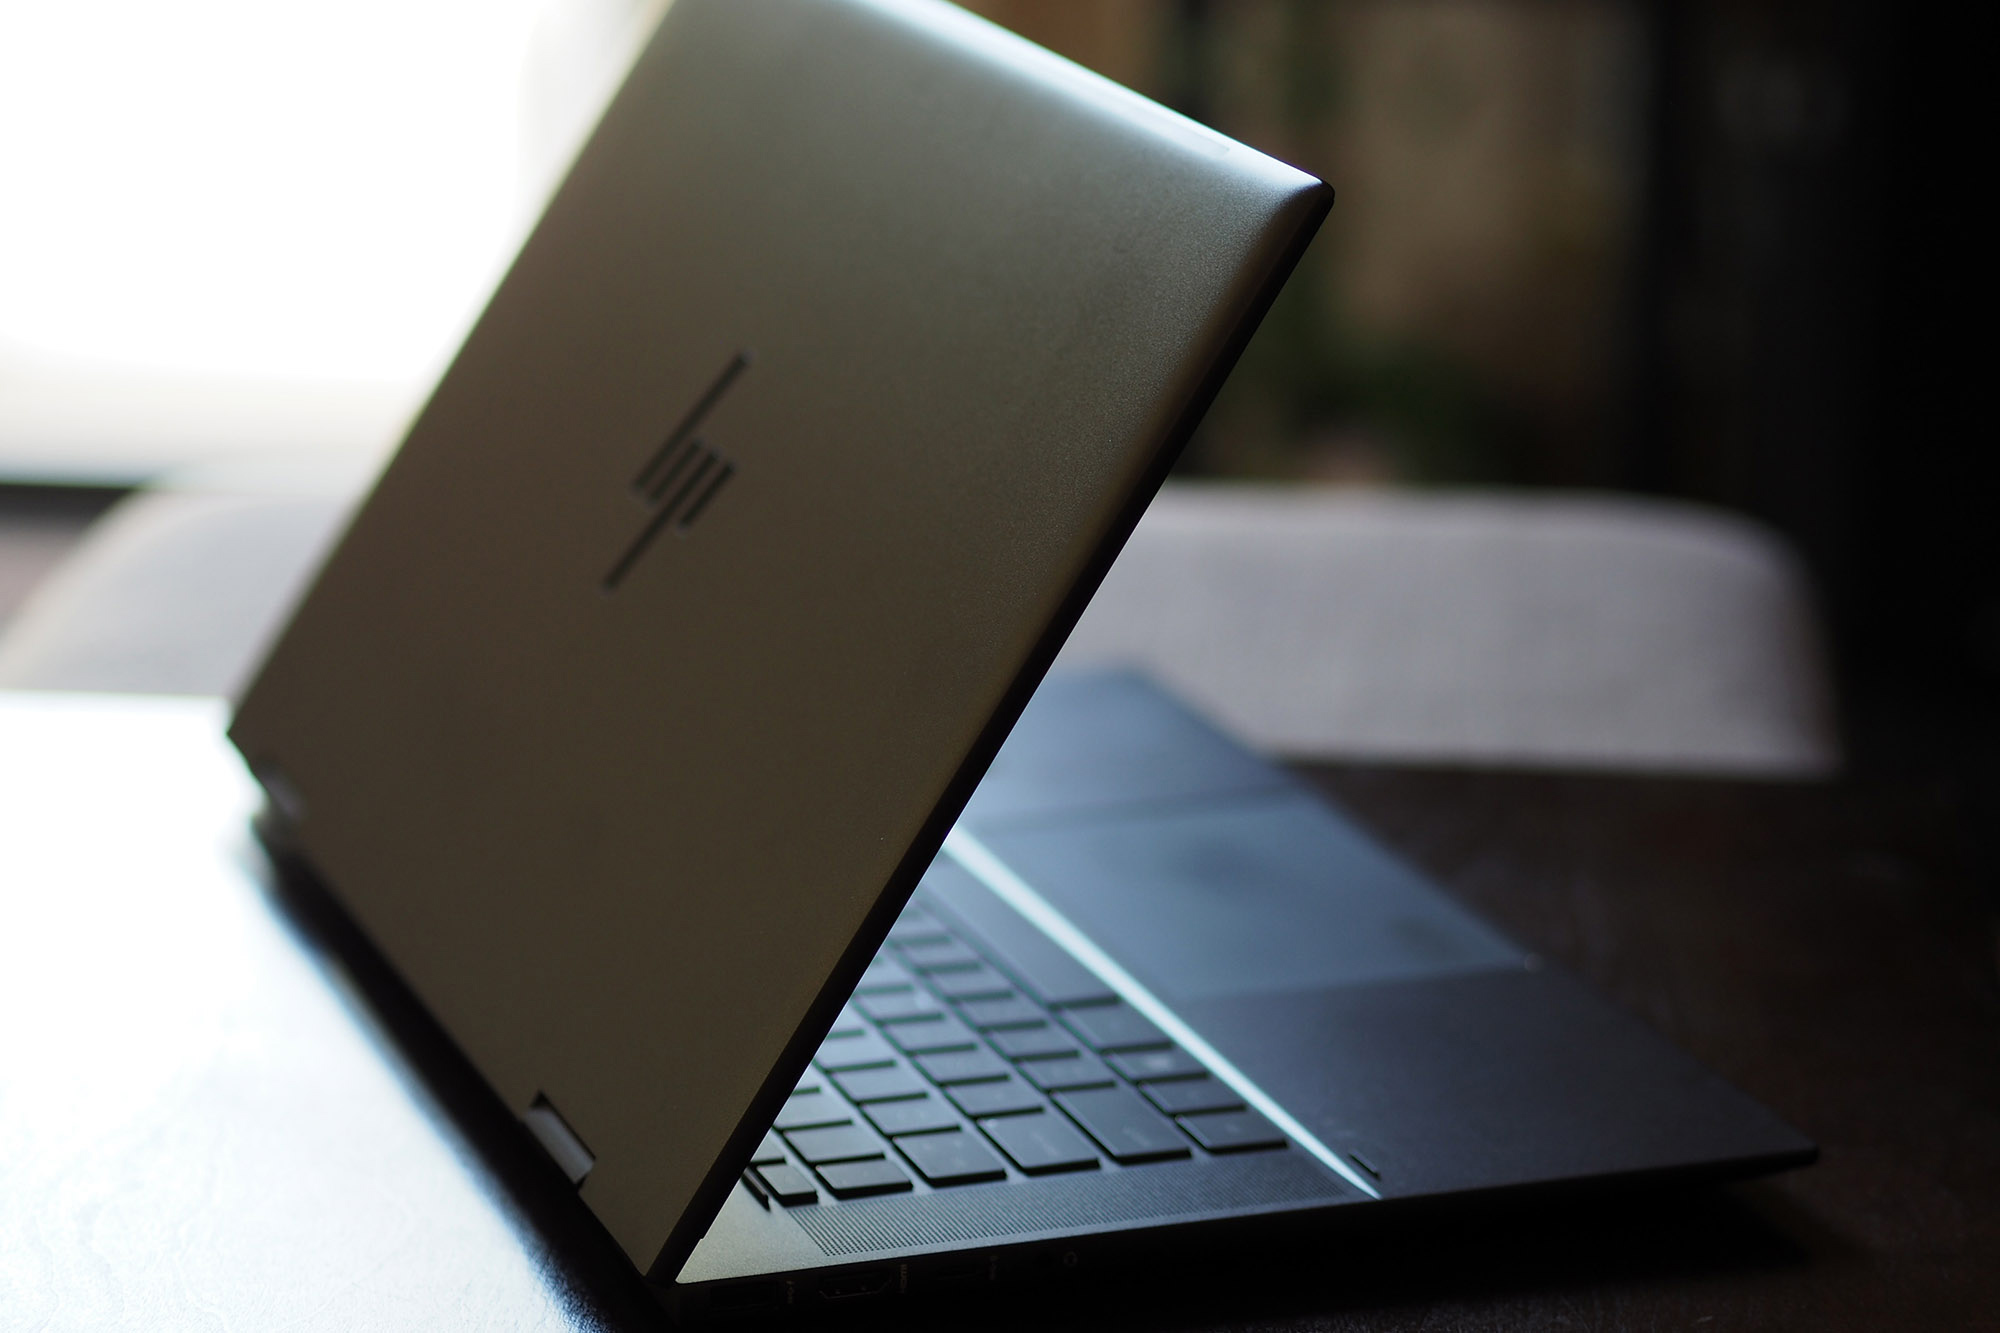 HP Envy x360 15 AMD Review: A Great 2-in-1 with Poor Colors Digital Trends